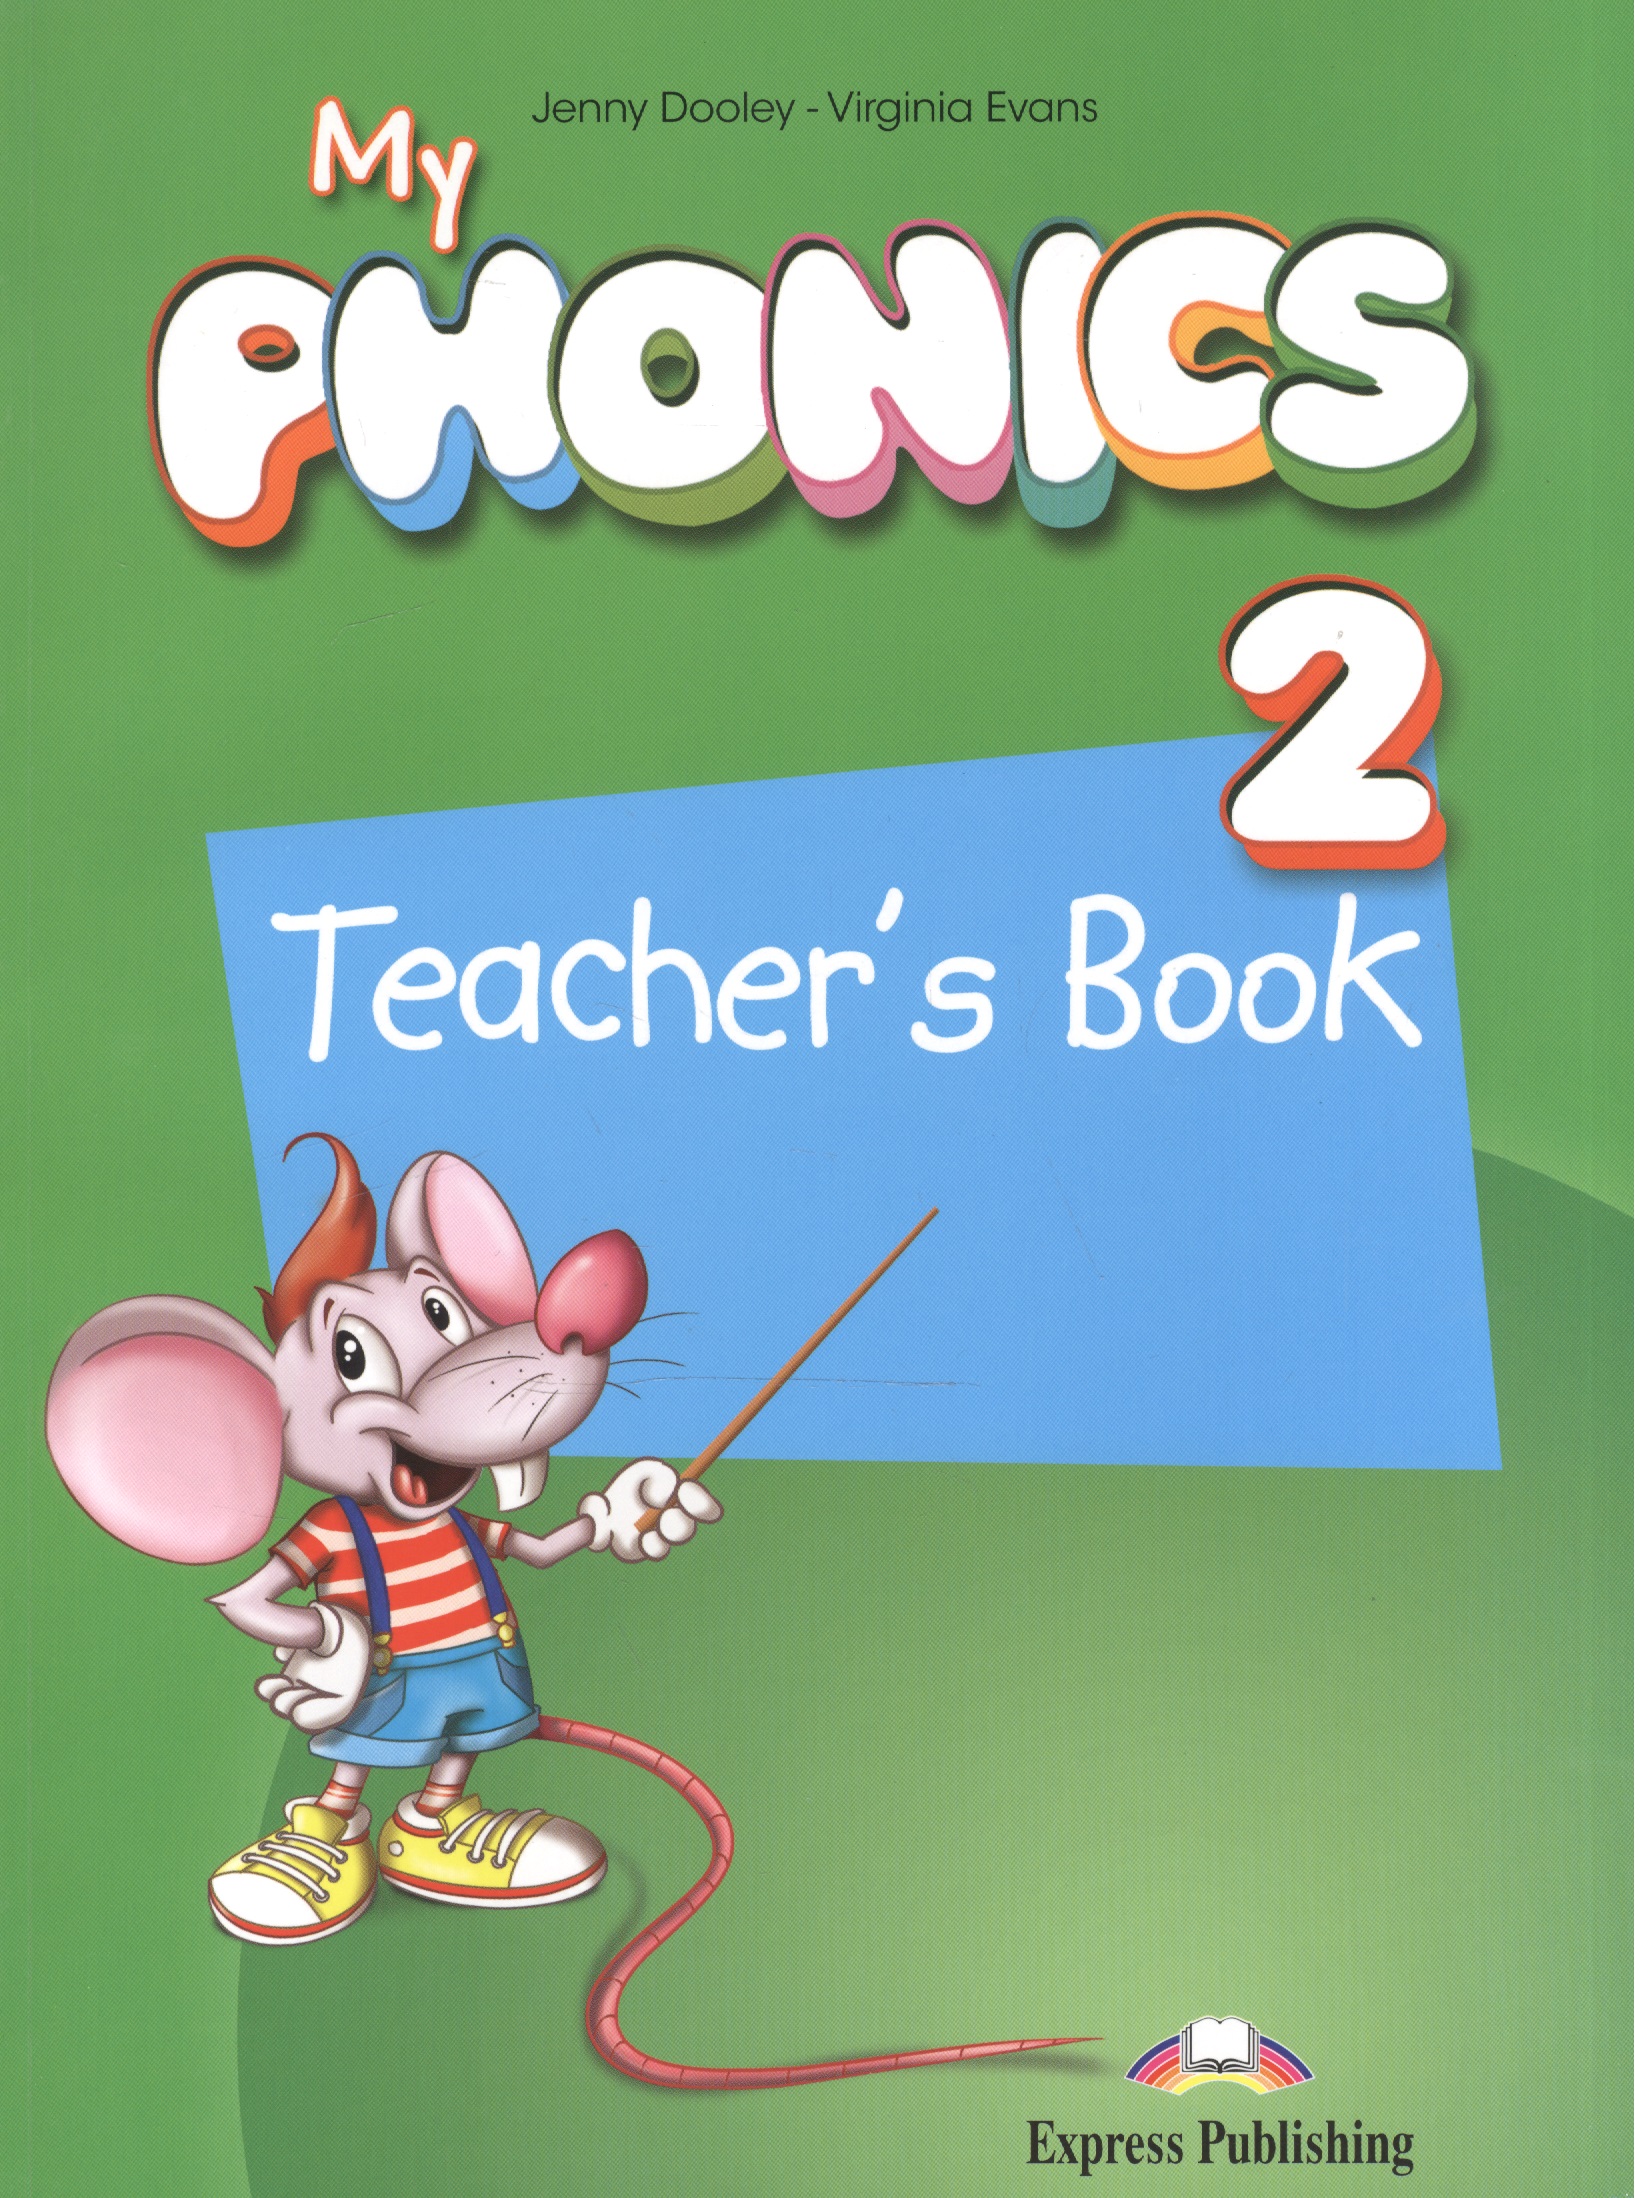 Дули Дженни My Phonics 2. Teacher's Book boyes alice stress free productivity a personalised toolkit to become your most efficient creative self